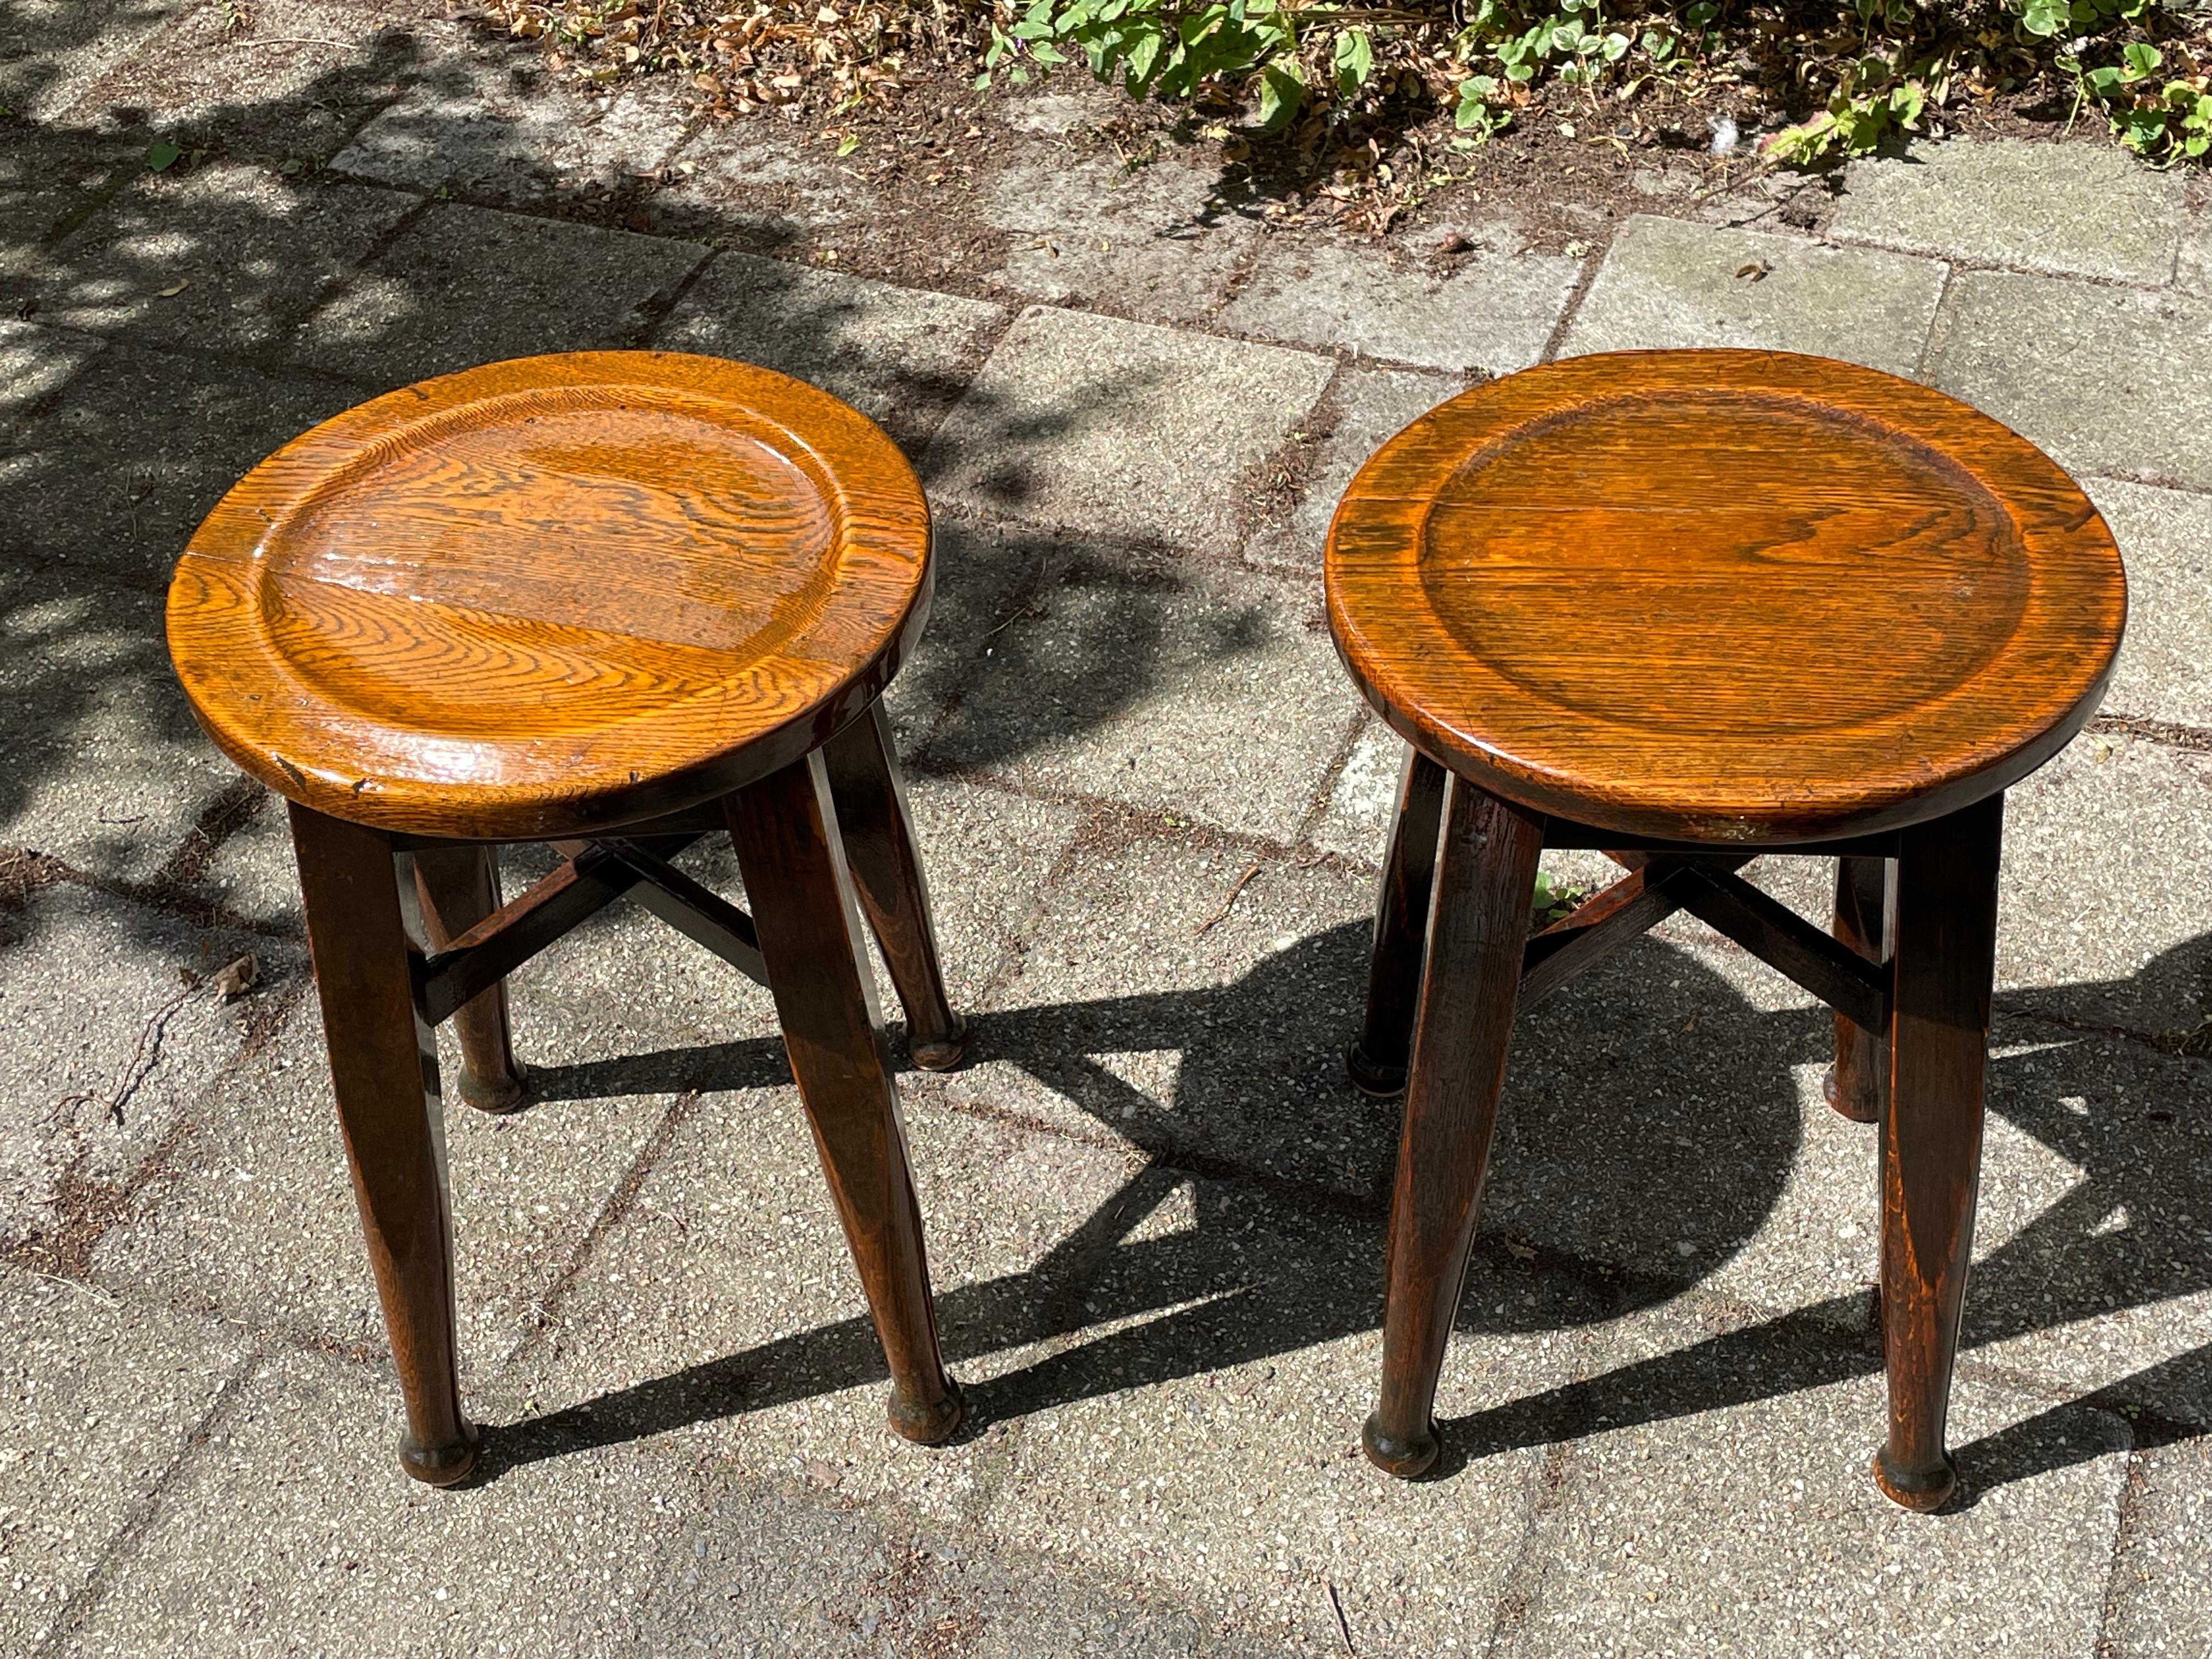 European Handmade Antique Pair of Arts and Crafts Style Oak Stools by Gaskell & Chambers For Sale